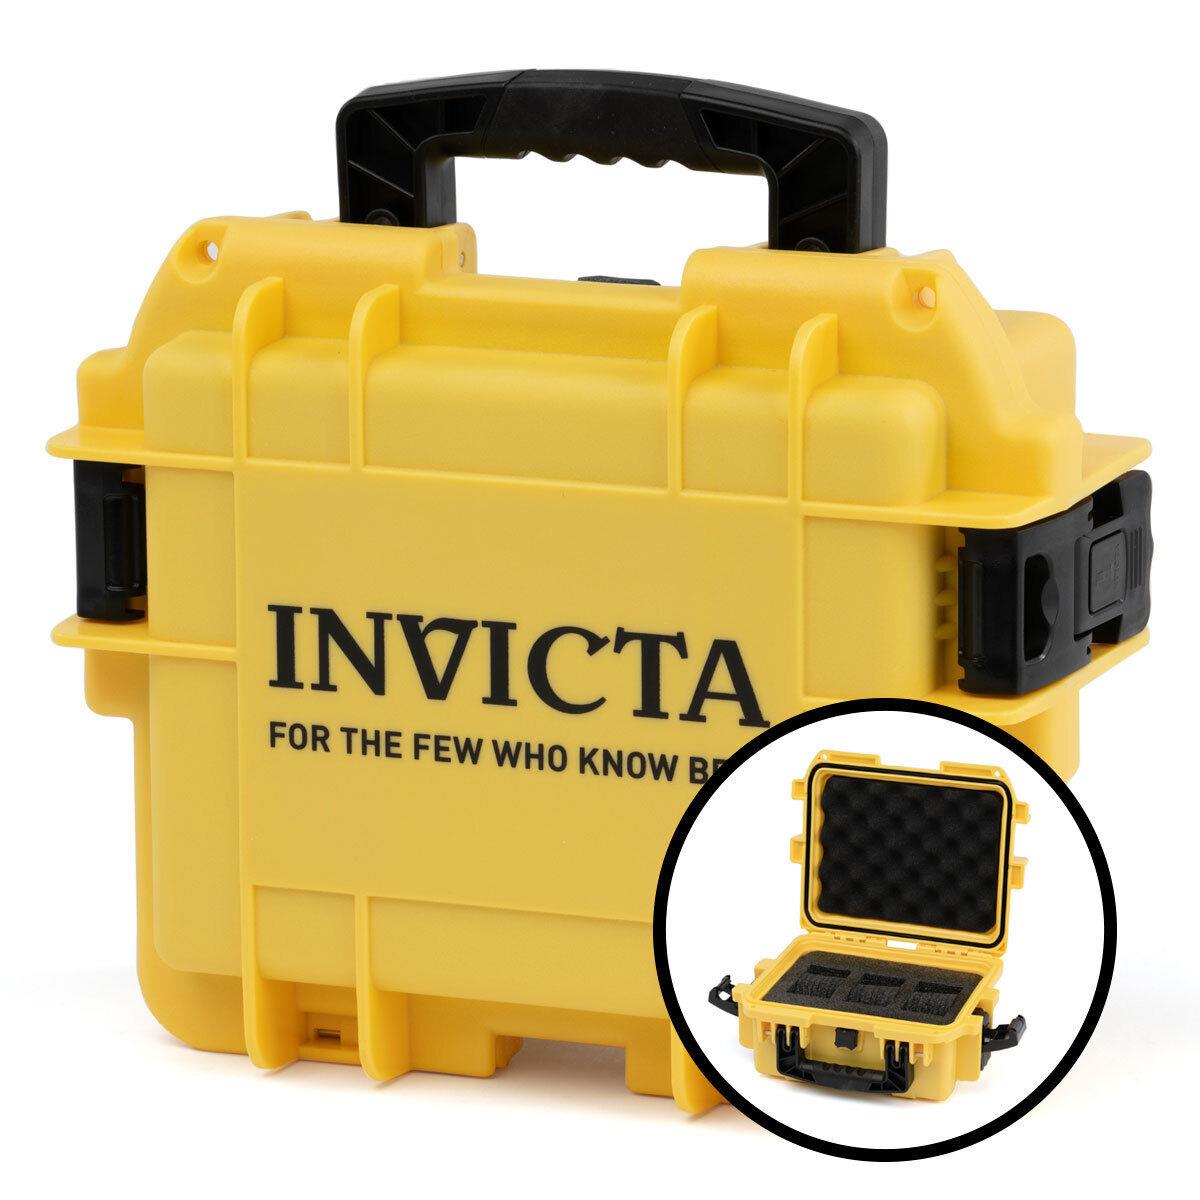 Invicta 3-Slot Impact Yellow Color Collectors Waterproof Watch Case DC3-LTYEL - Yellow